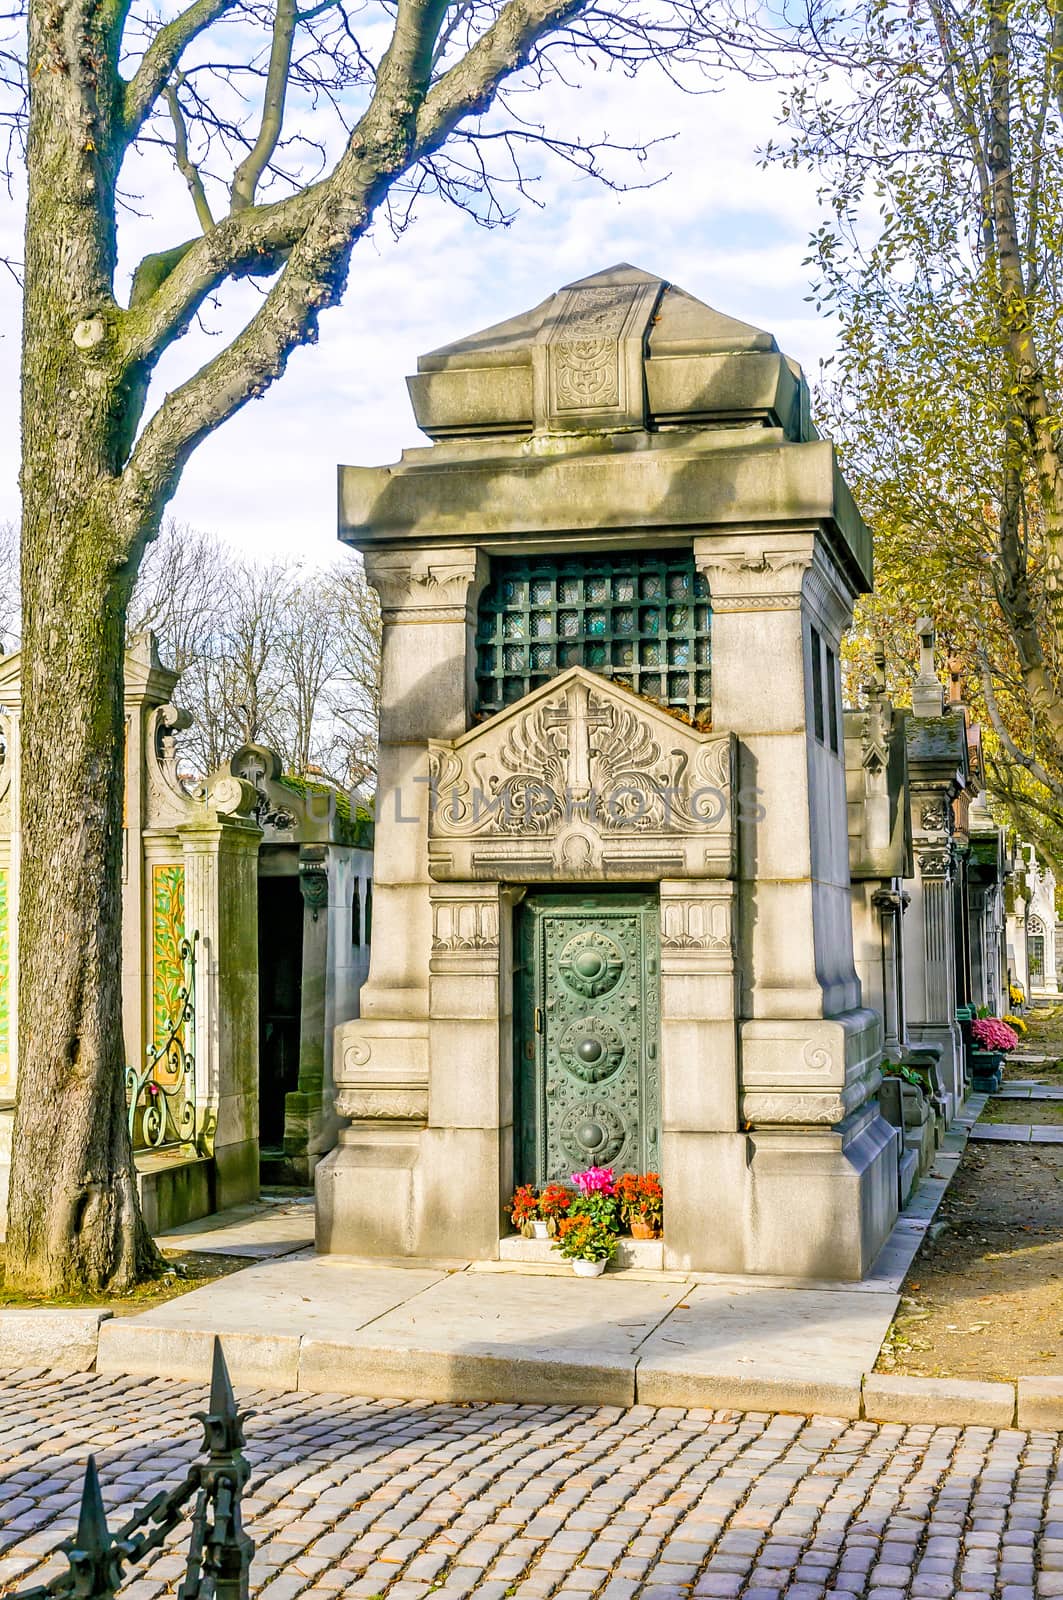 A view of the Pere Lachaise, the most famous cemetery in Paris, France,  with the tombs of very famous people